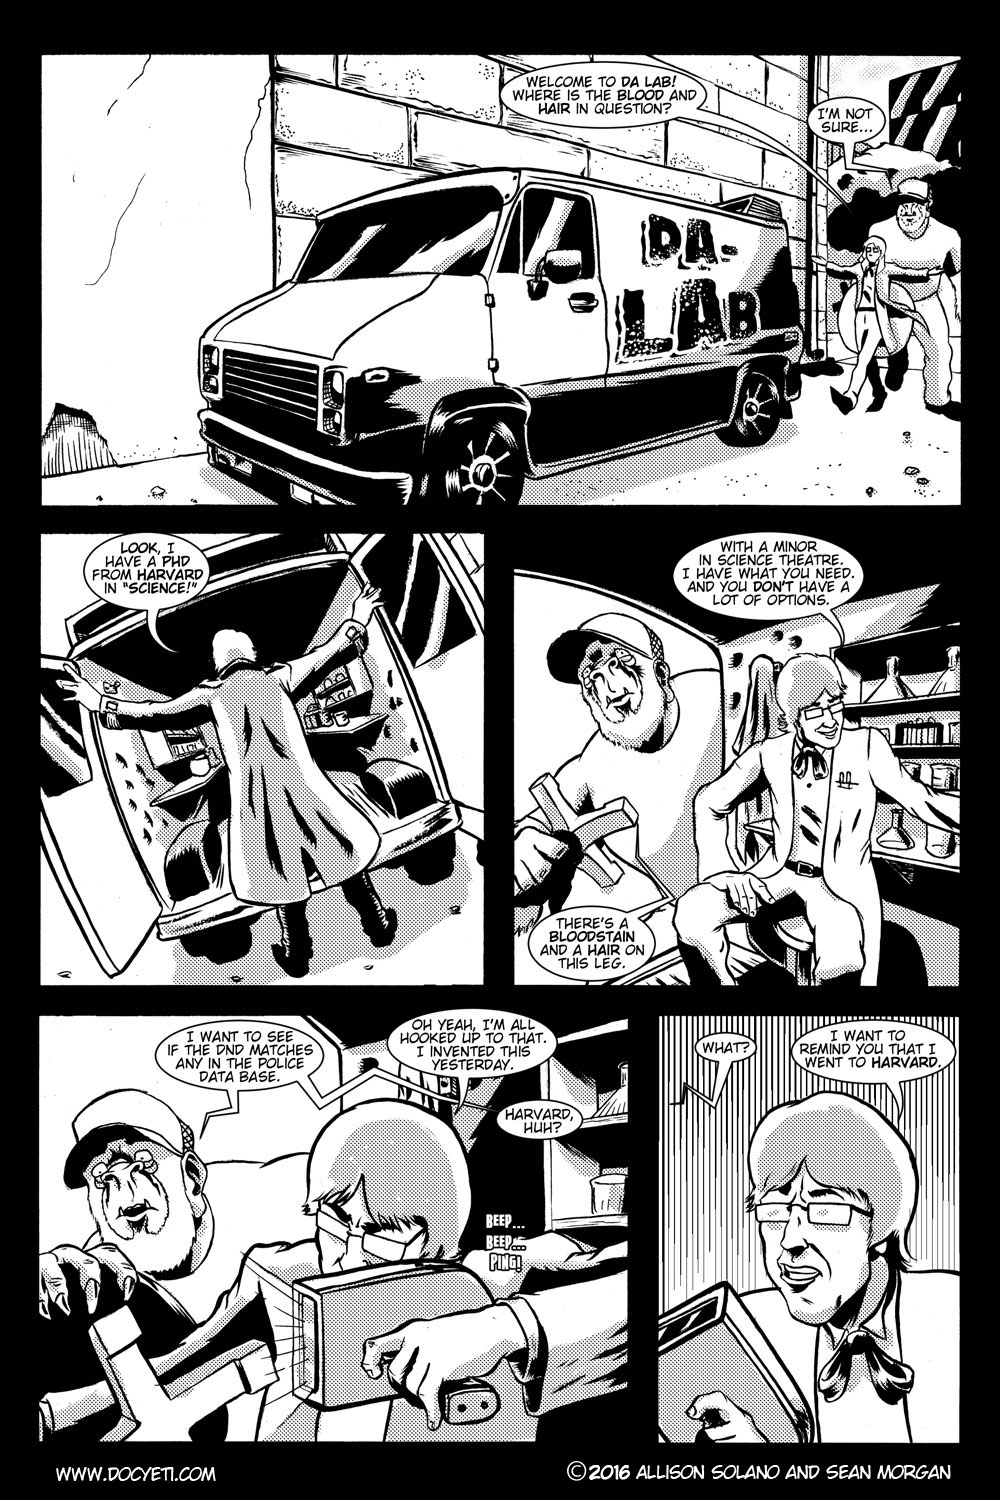 This Yeti for Hire! or the Yeti with the Lace Kerchief! pg.19